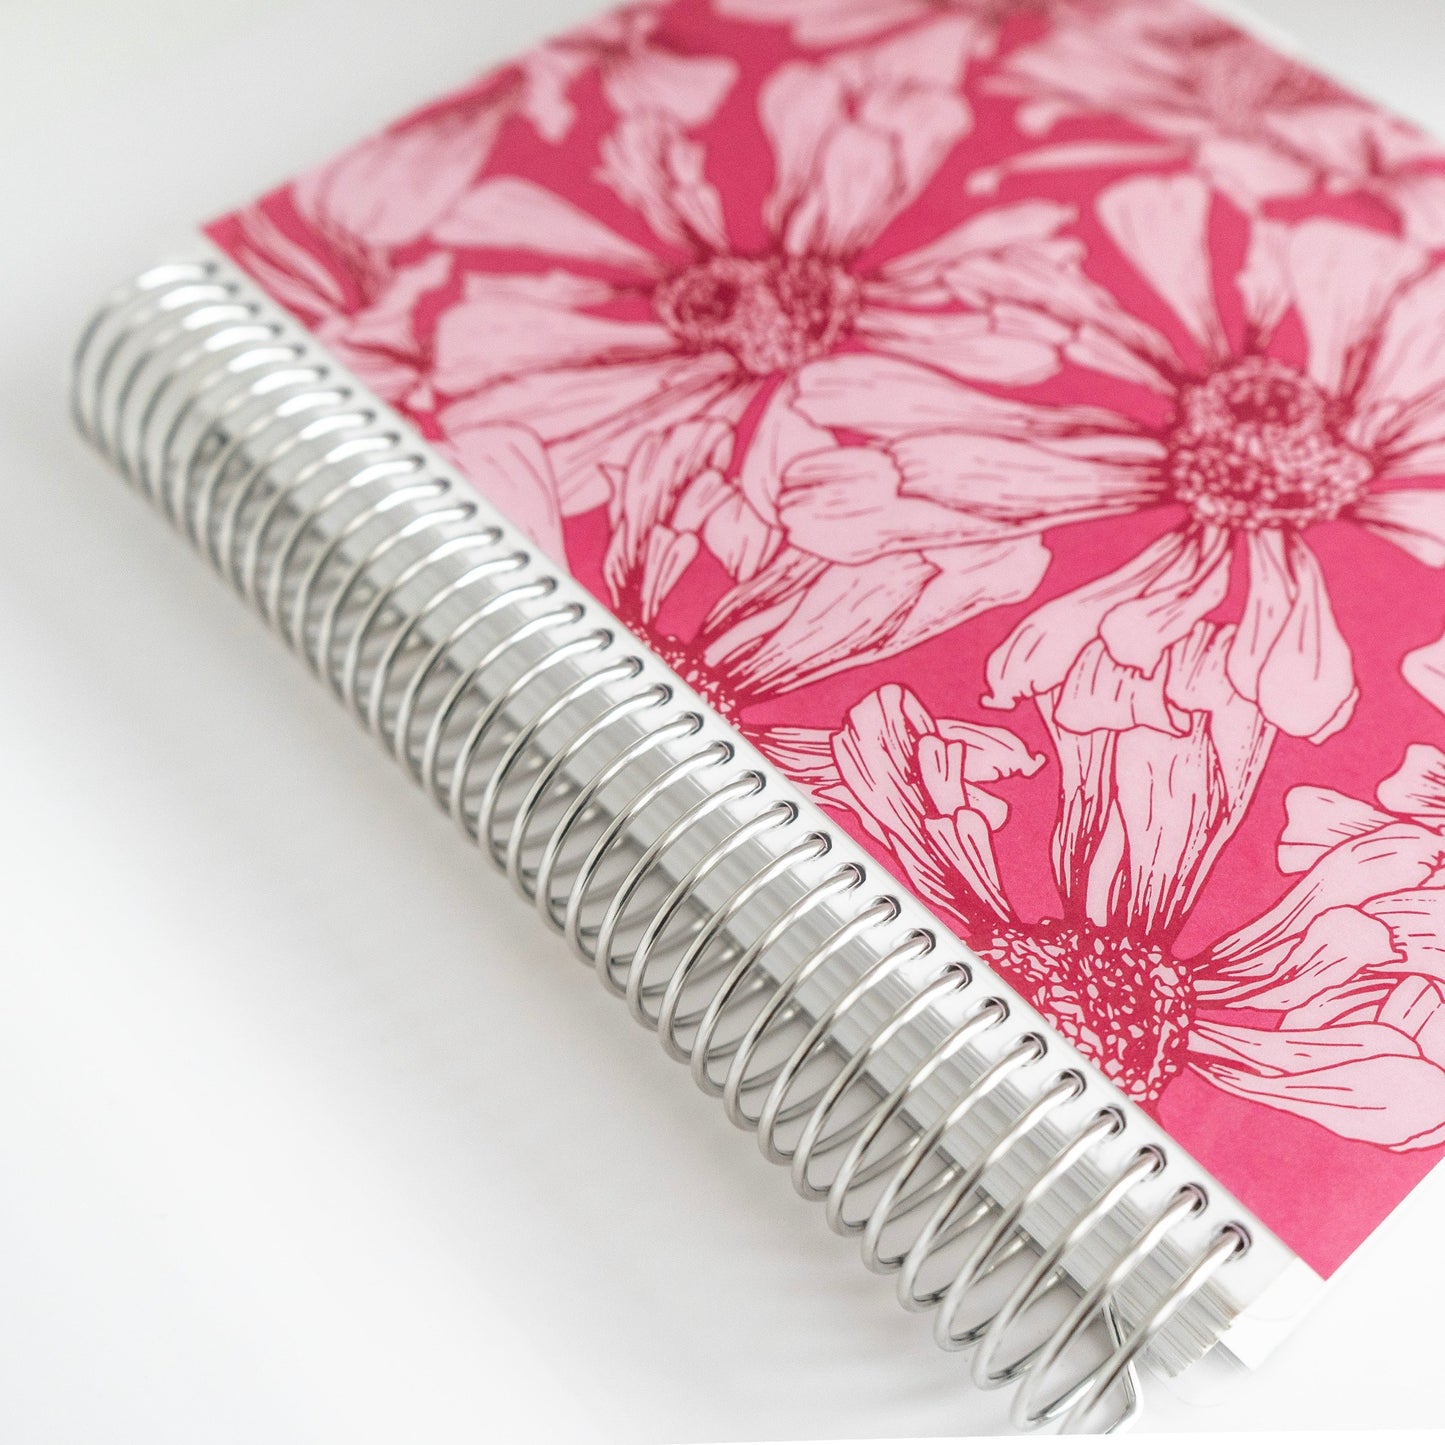 Daily Focus Planner: Pink Floral